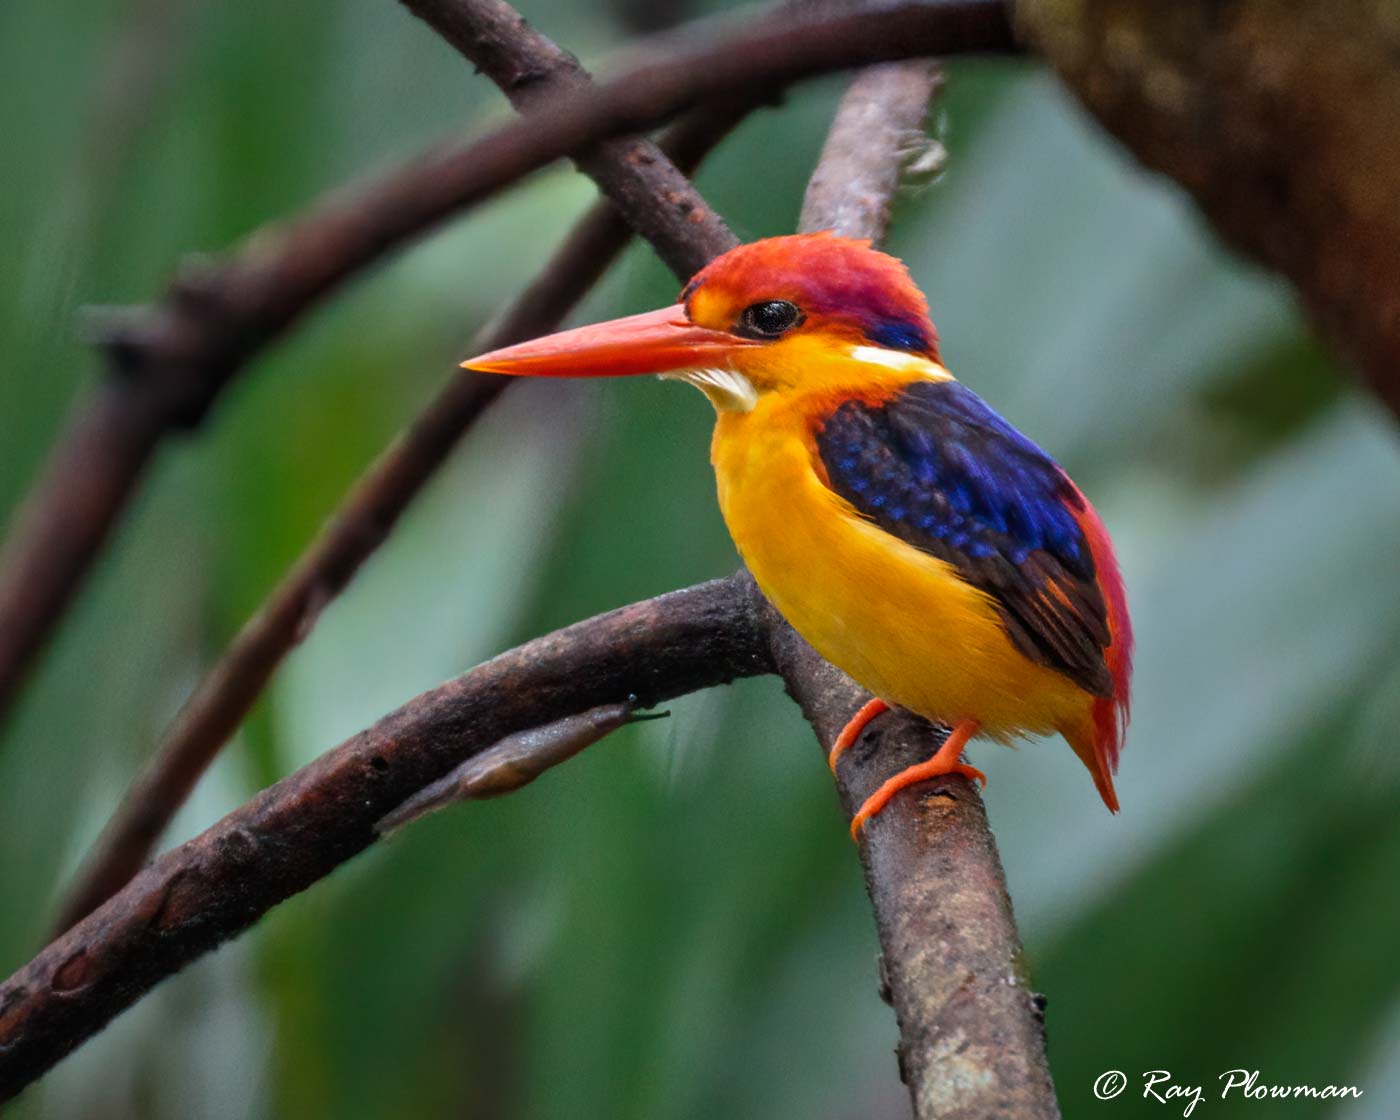 Oriental Dwarf Kingfisher (Ceyx erithacus) hunting for Insects at Bukit Timah Nature Reserve in Singapore